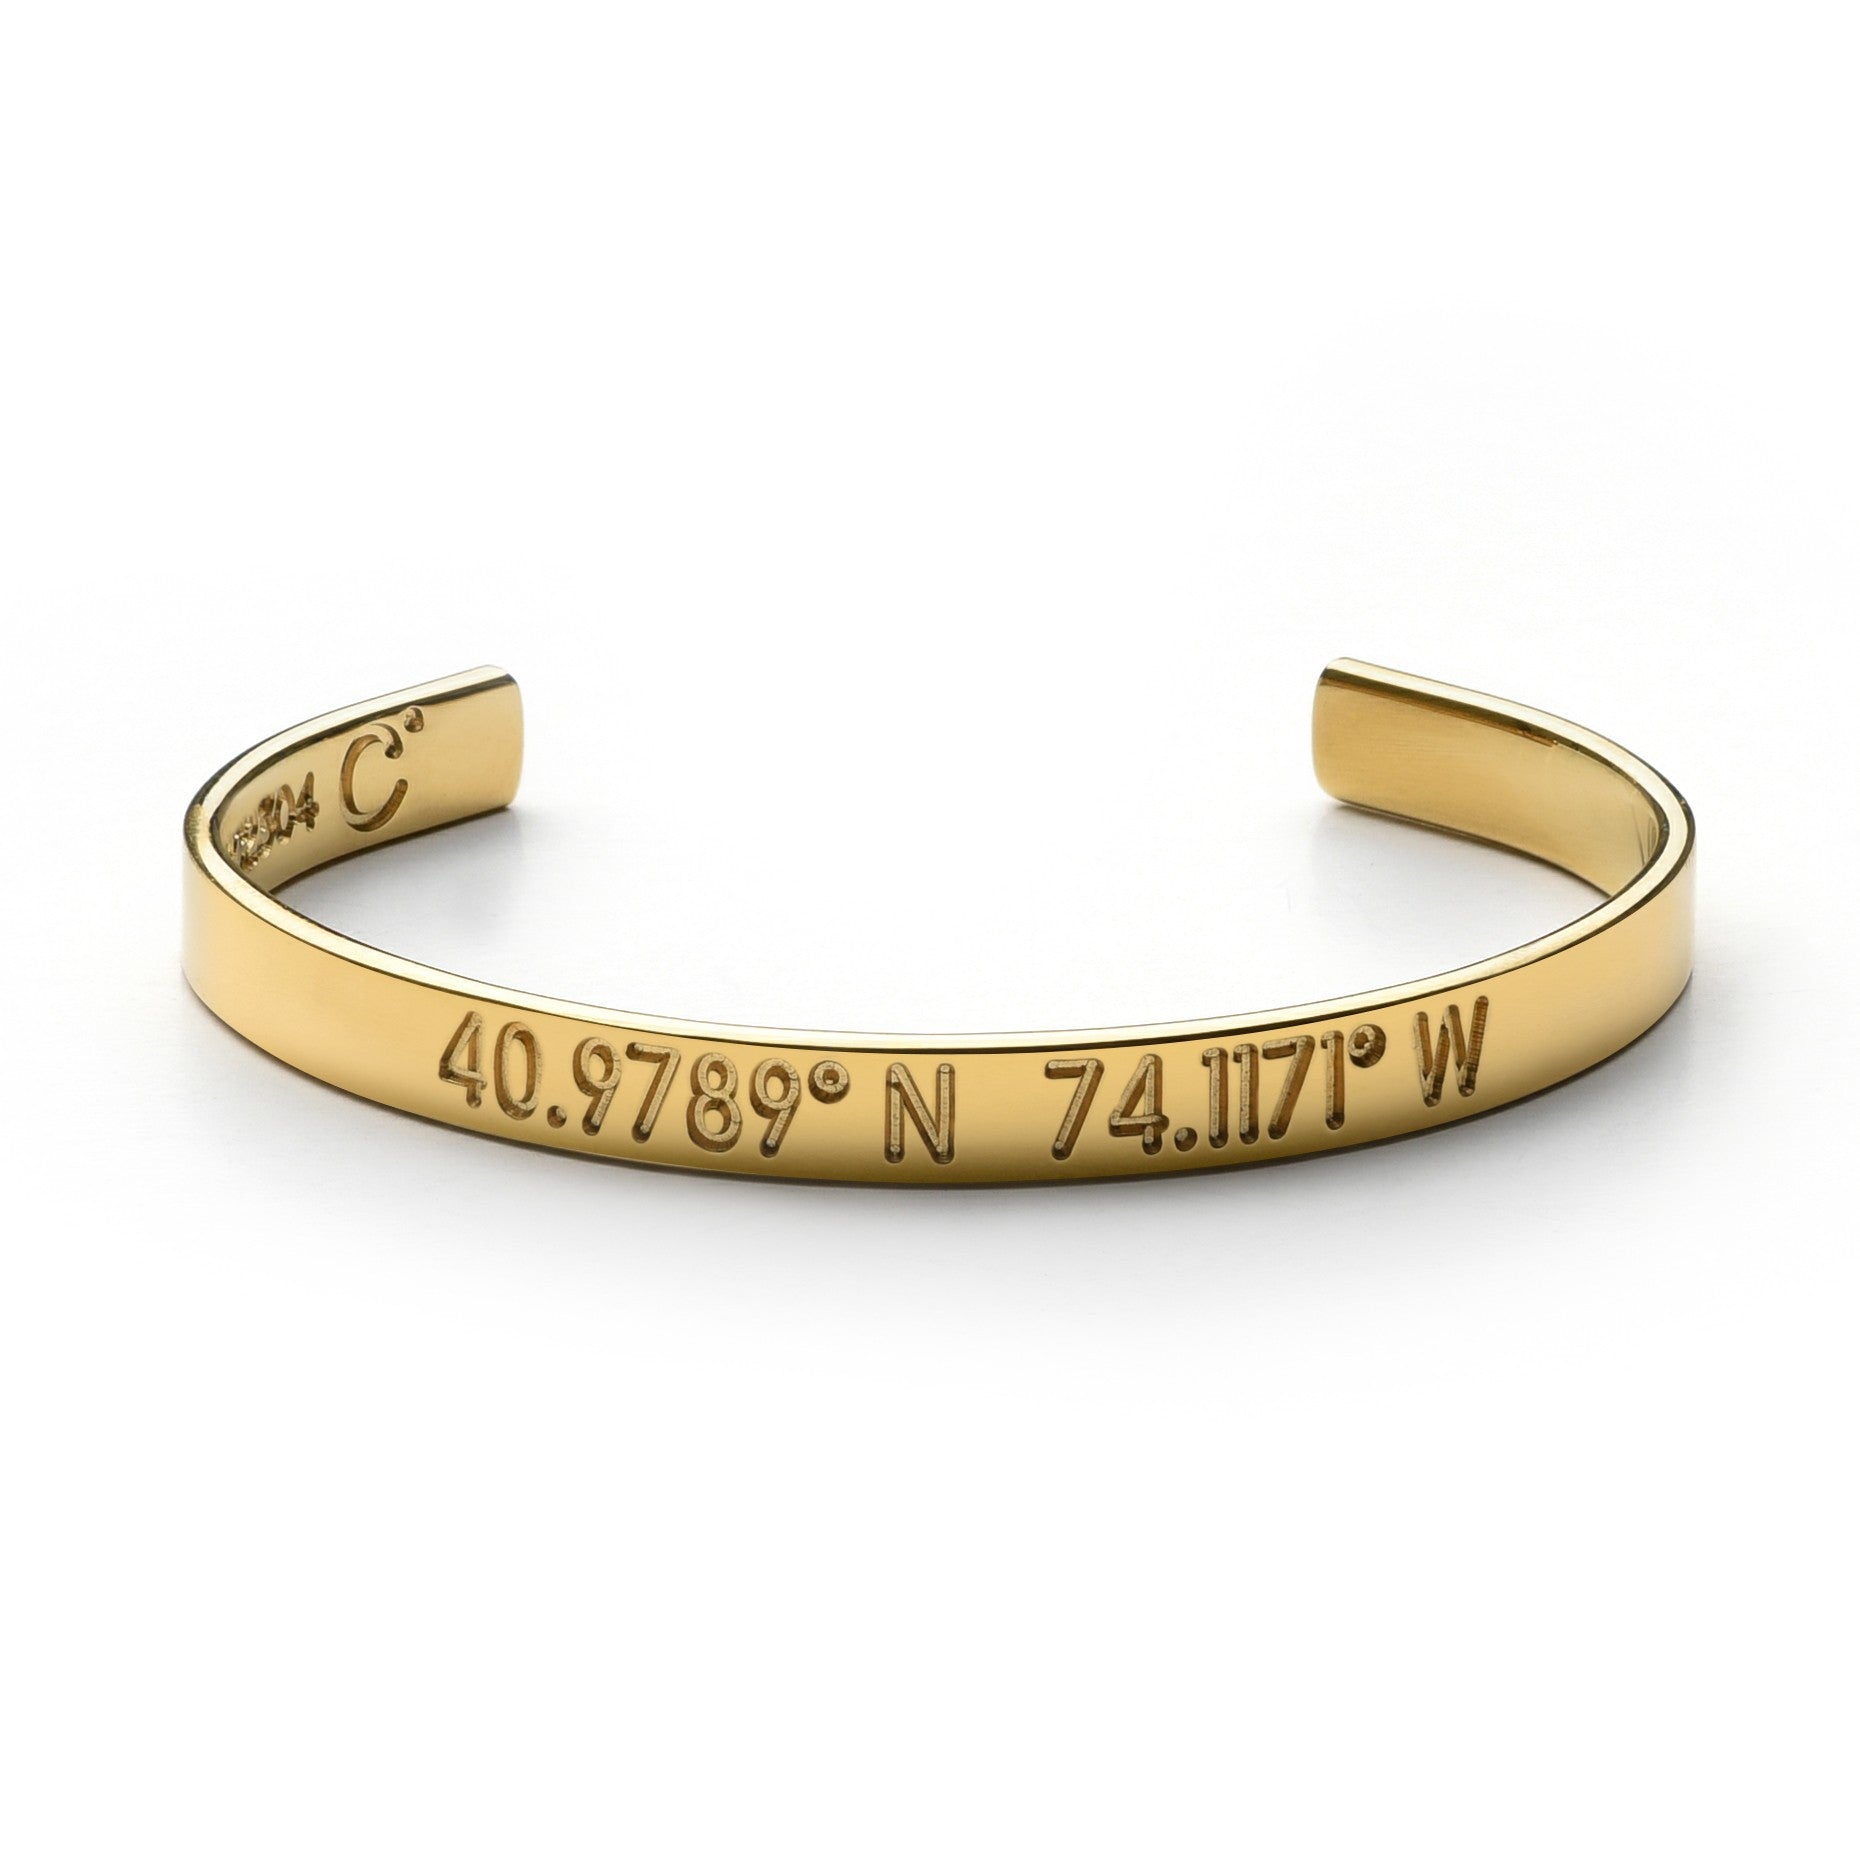 Coordinates Jewelry (How to find coordinates for my longitude and lati